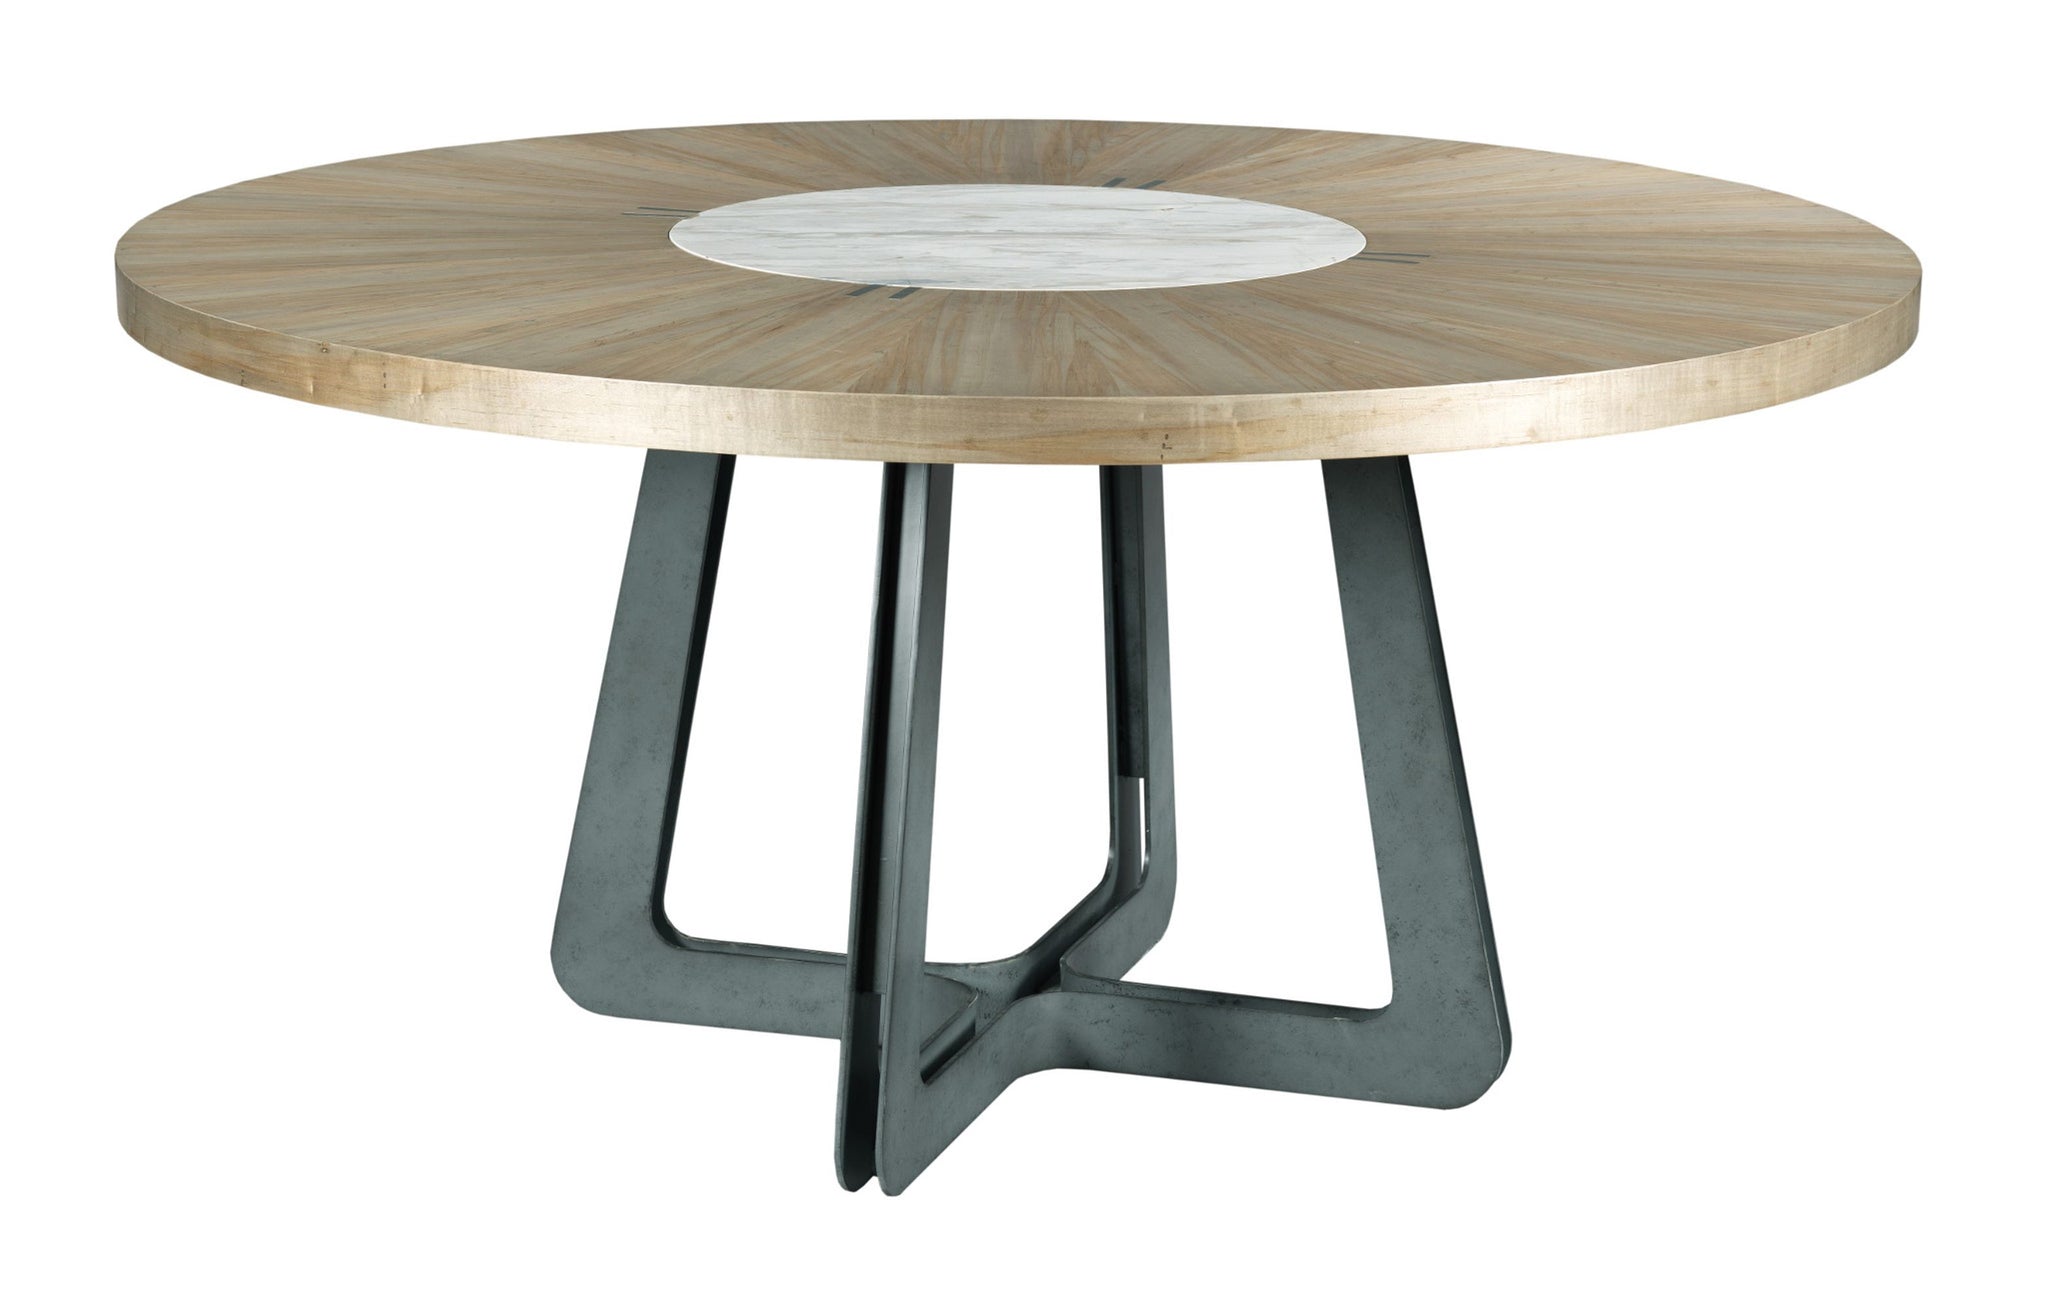 CONCENTRIC ROUND DINING TABLE COMPLETE